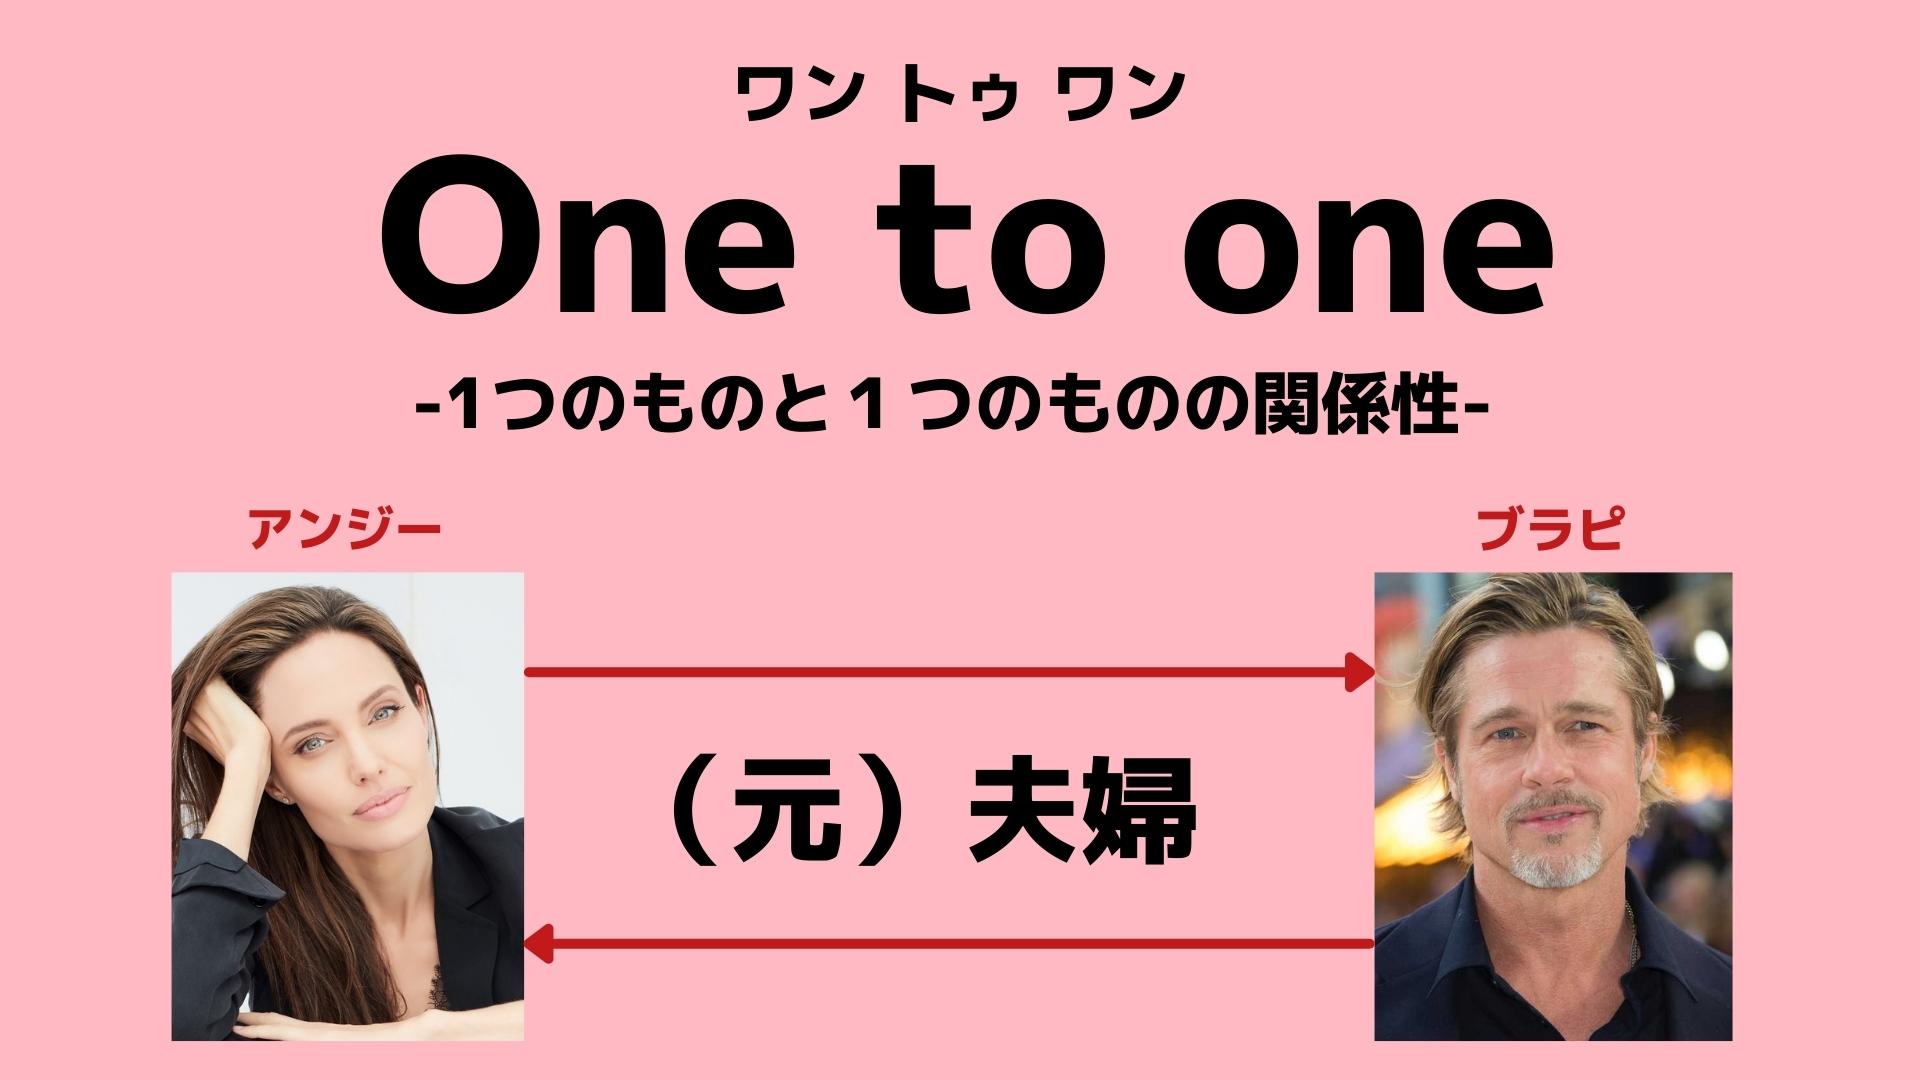 Relation　Typeの『One to one』を説明した図